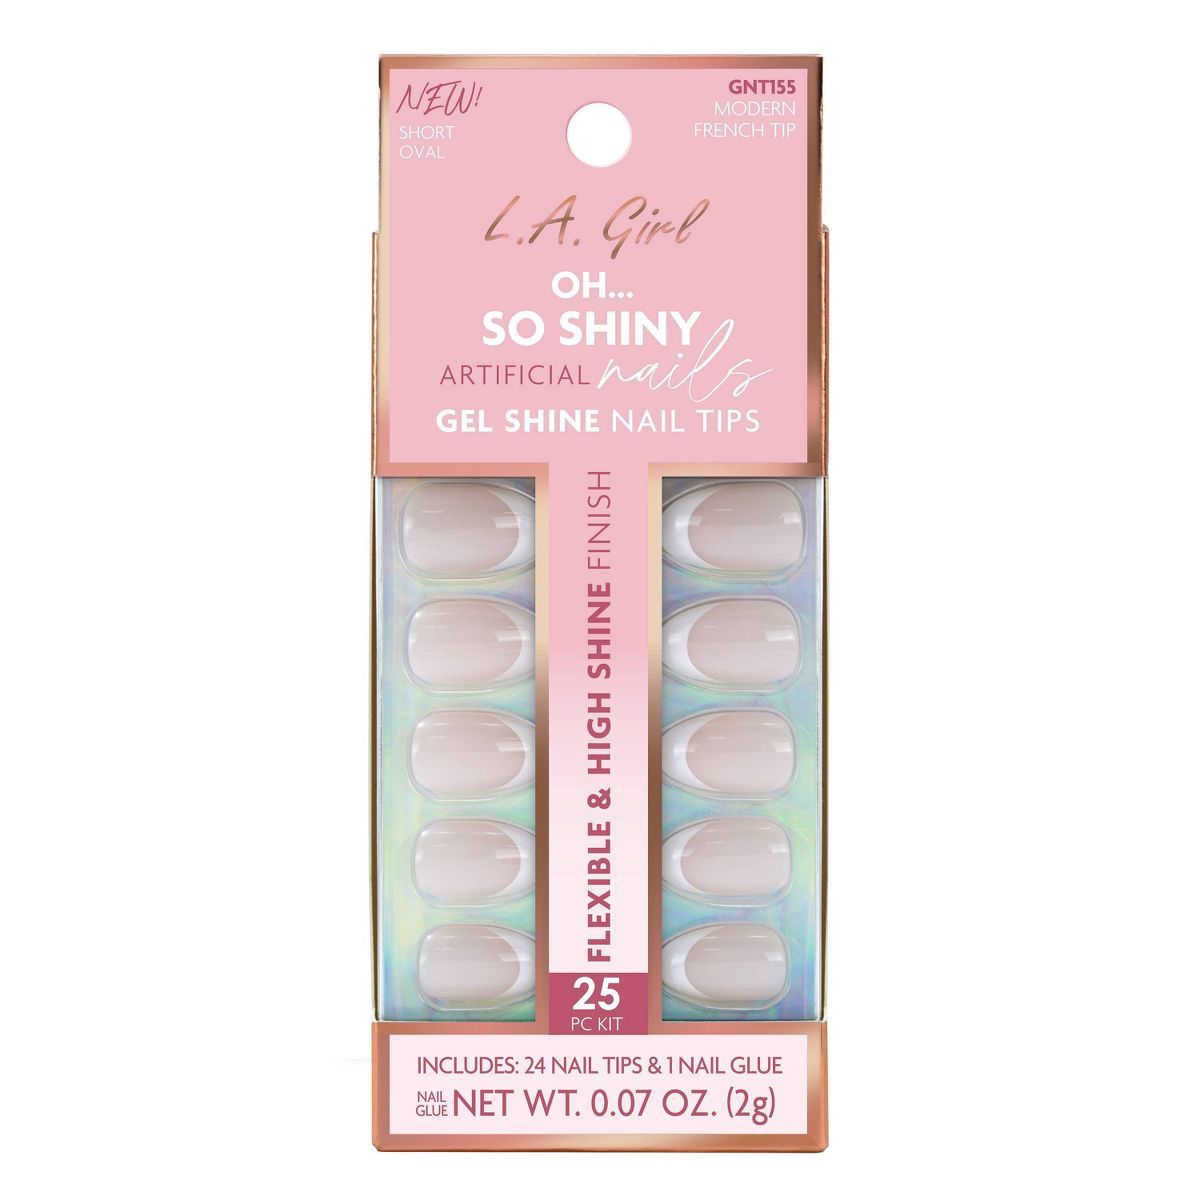 L.A. Girl Artificial Nail Tips- Oh So Shiny - Modern French Tip - 25ct | Target